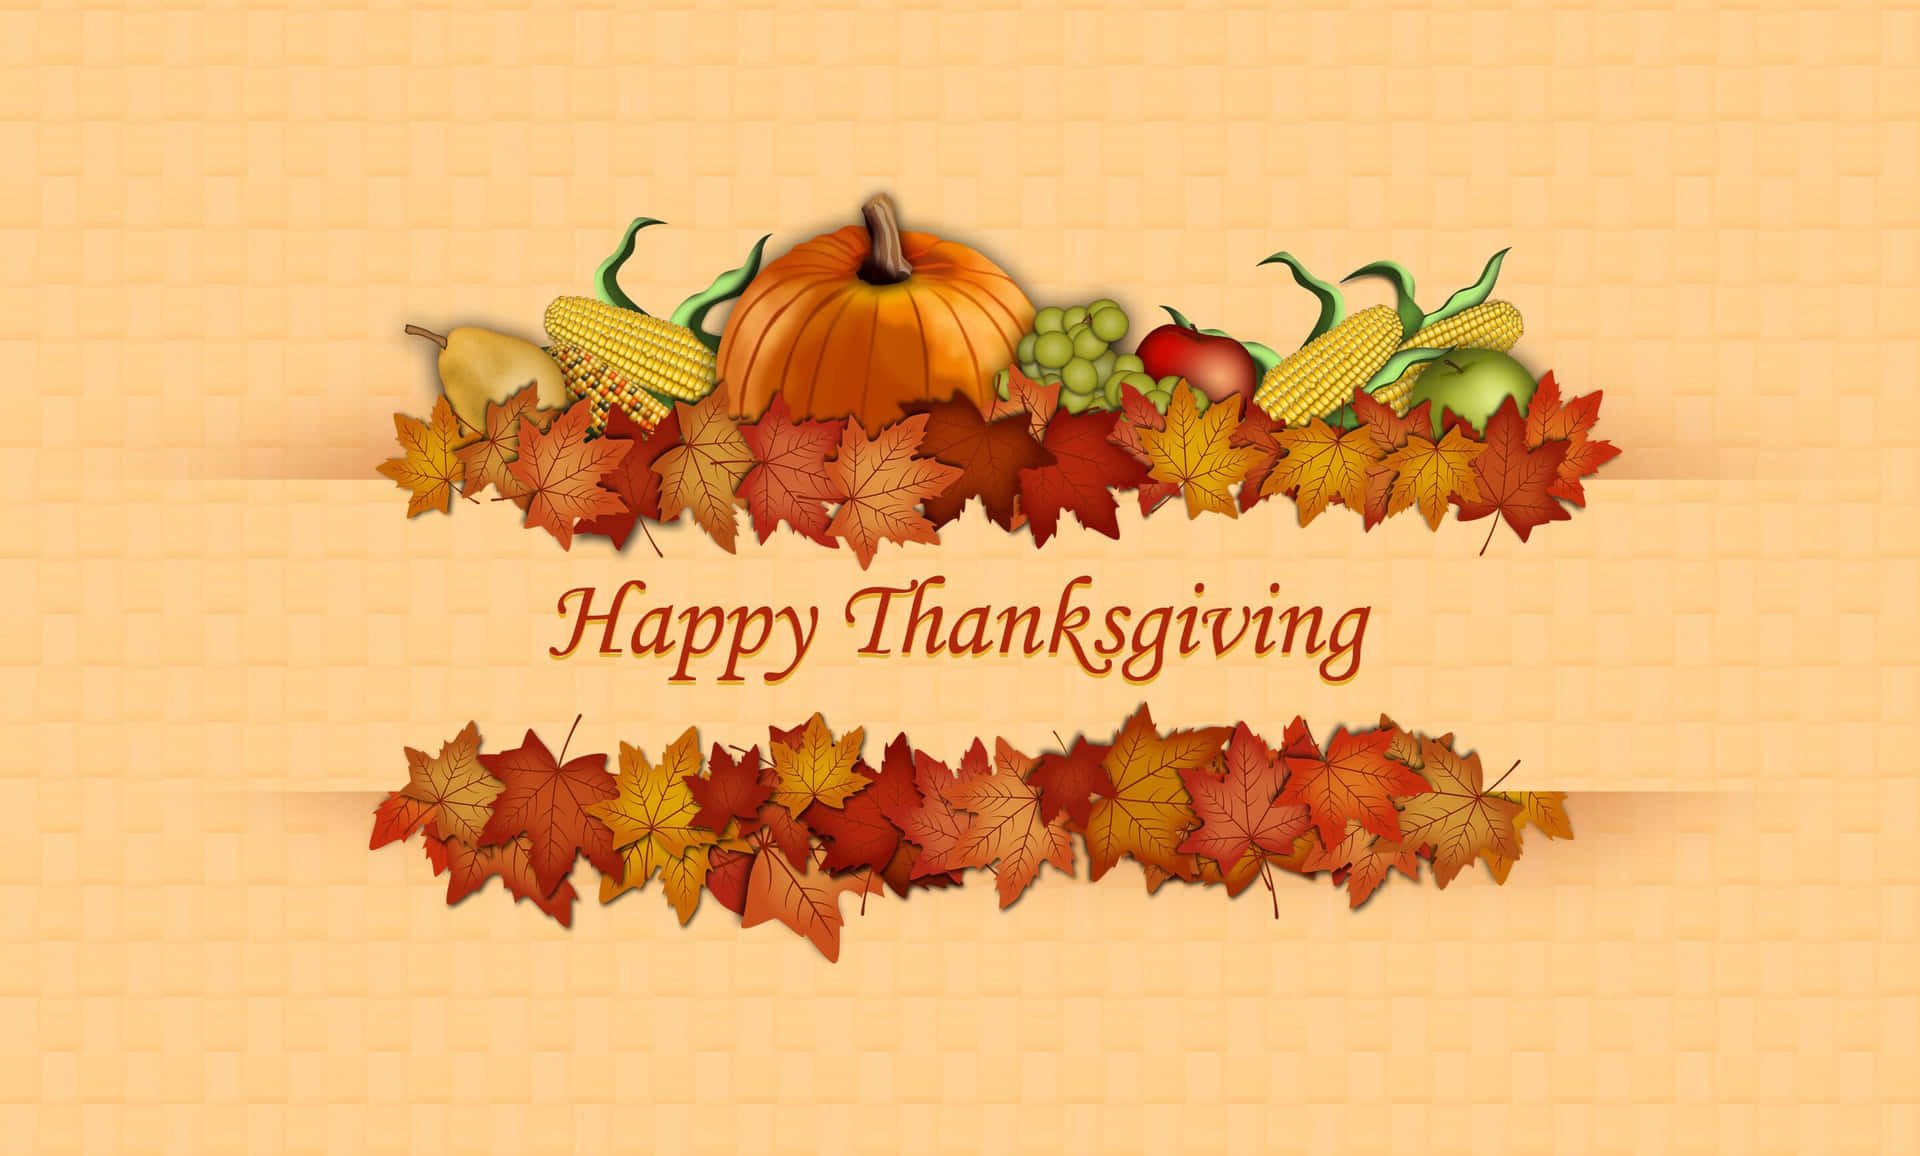 Celebrate with family and friends during Thanksgiving